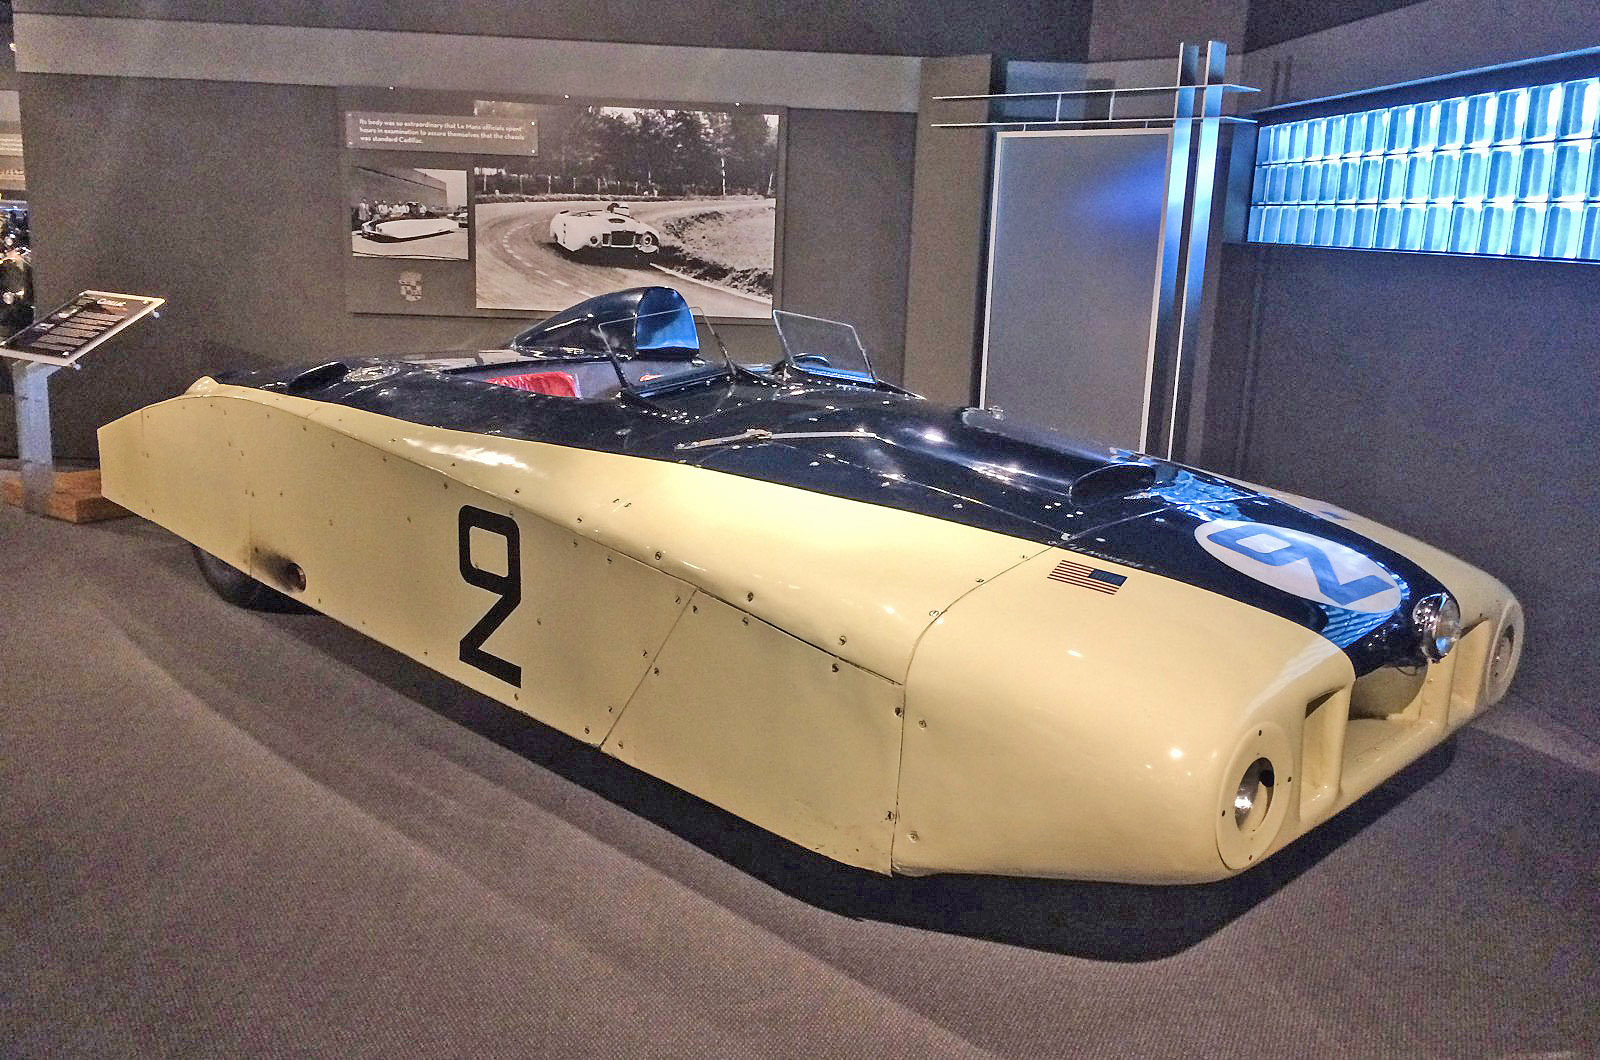 <p>In 1950, the French crowd at Le Mans dubbed this car “Le Monstre” due to its unconventional appearance. However, the Cadillac Series 61 would win their hearts over by the end of the race. The rather ugly appearance of the Series 61 was actually an attempt at making the car more aerodynamic and light weight. </p><p>After an unfortunate crash, Le Monstre managed to claw its way back up from 35th place to finish 11th, its streamlined design allowing it to outrun the competition. While Le Monstre did not finish on the podium, it became a crowd favorite, and cemented its place in history as one of the most memorable American cars to ever compete at Le Mans.</p>